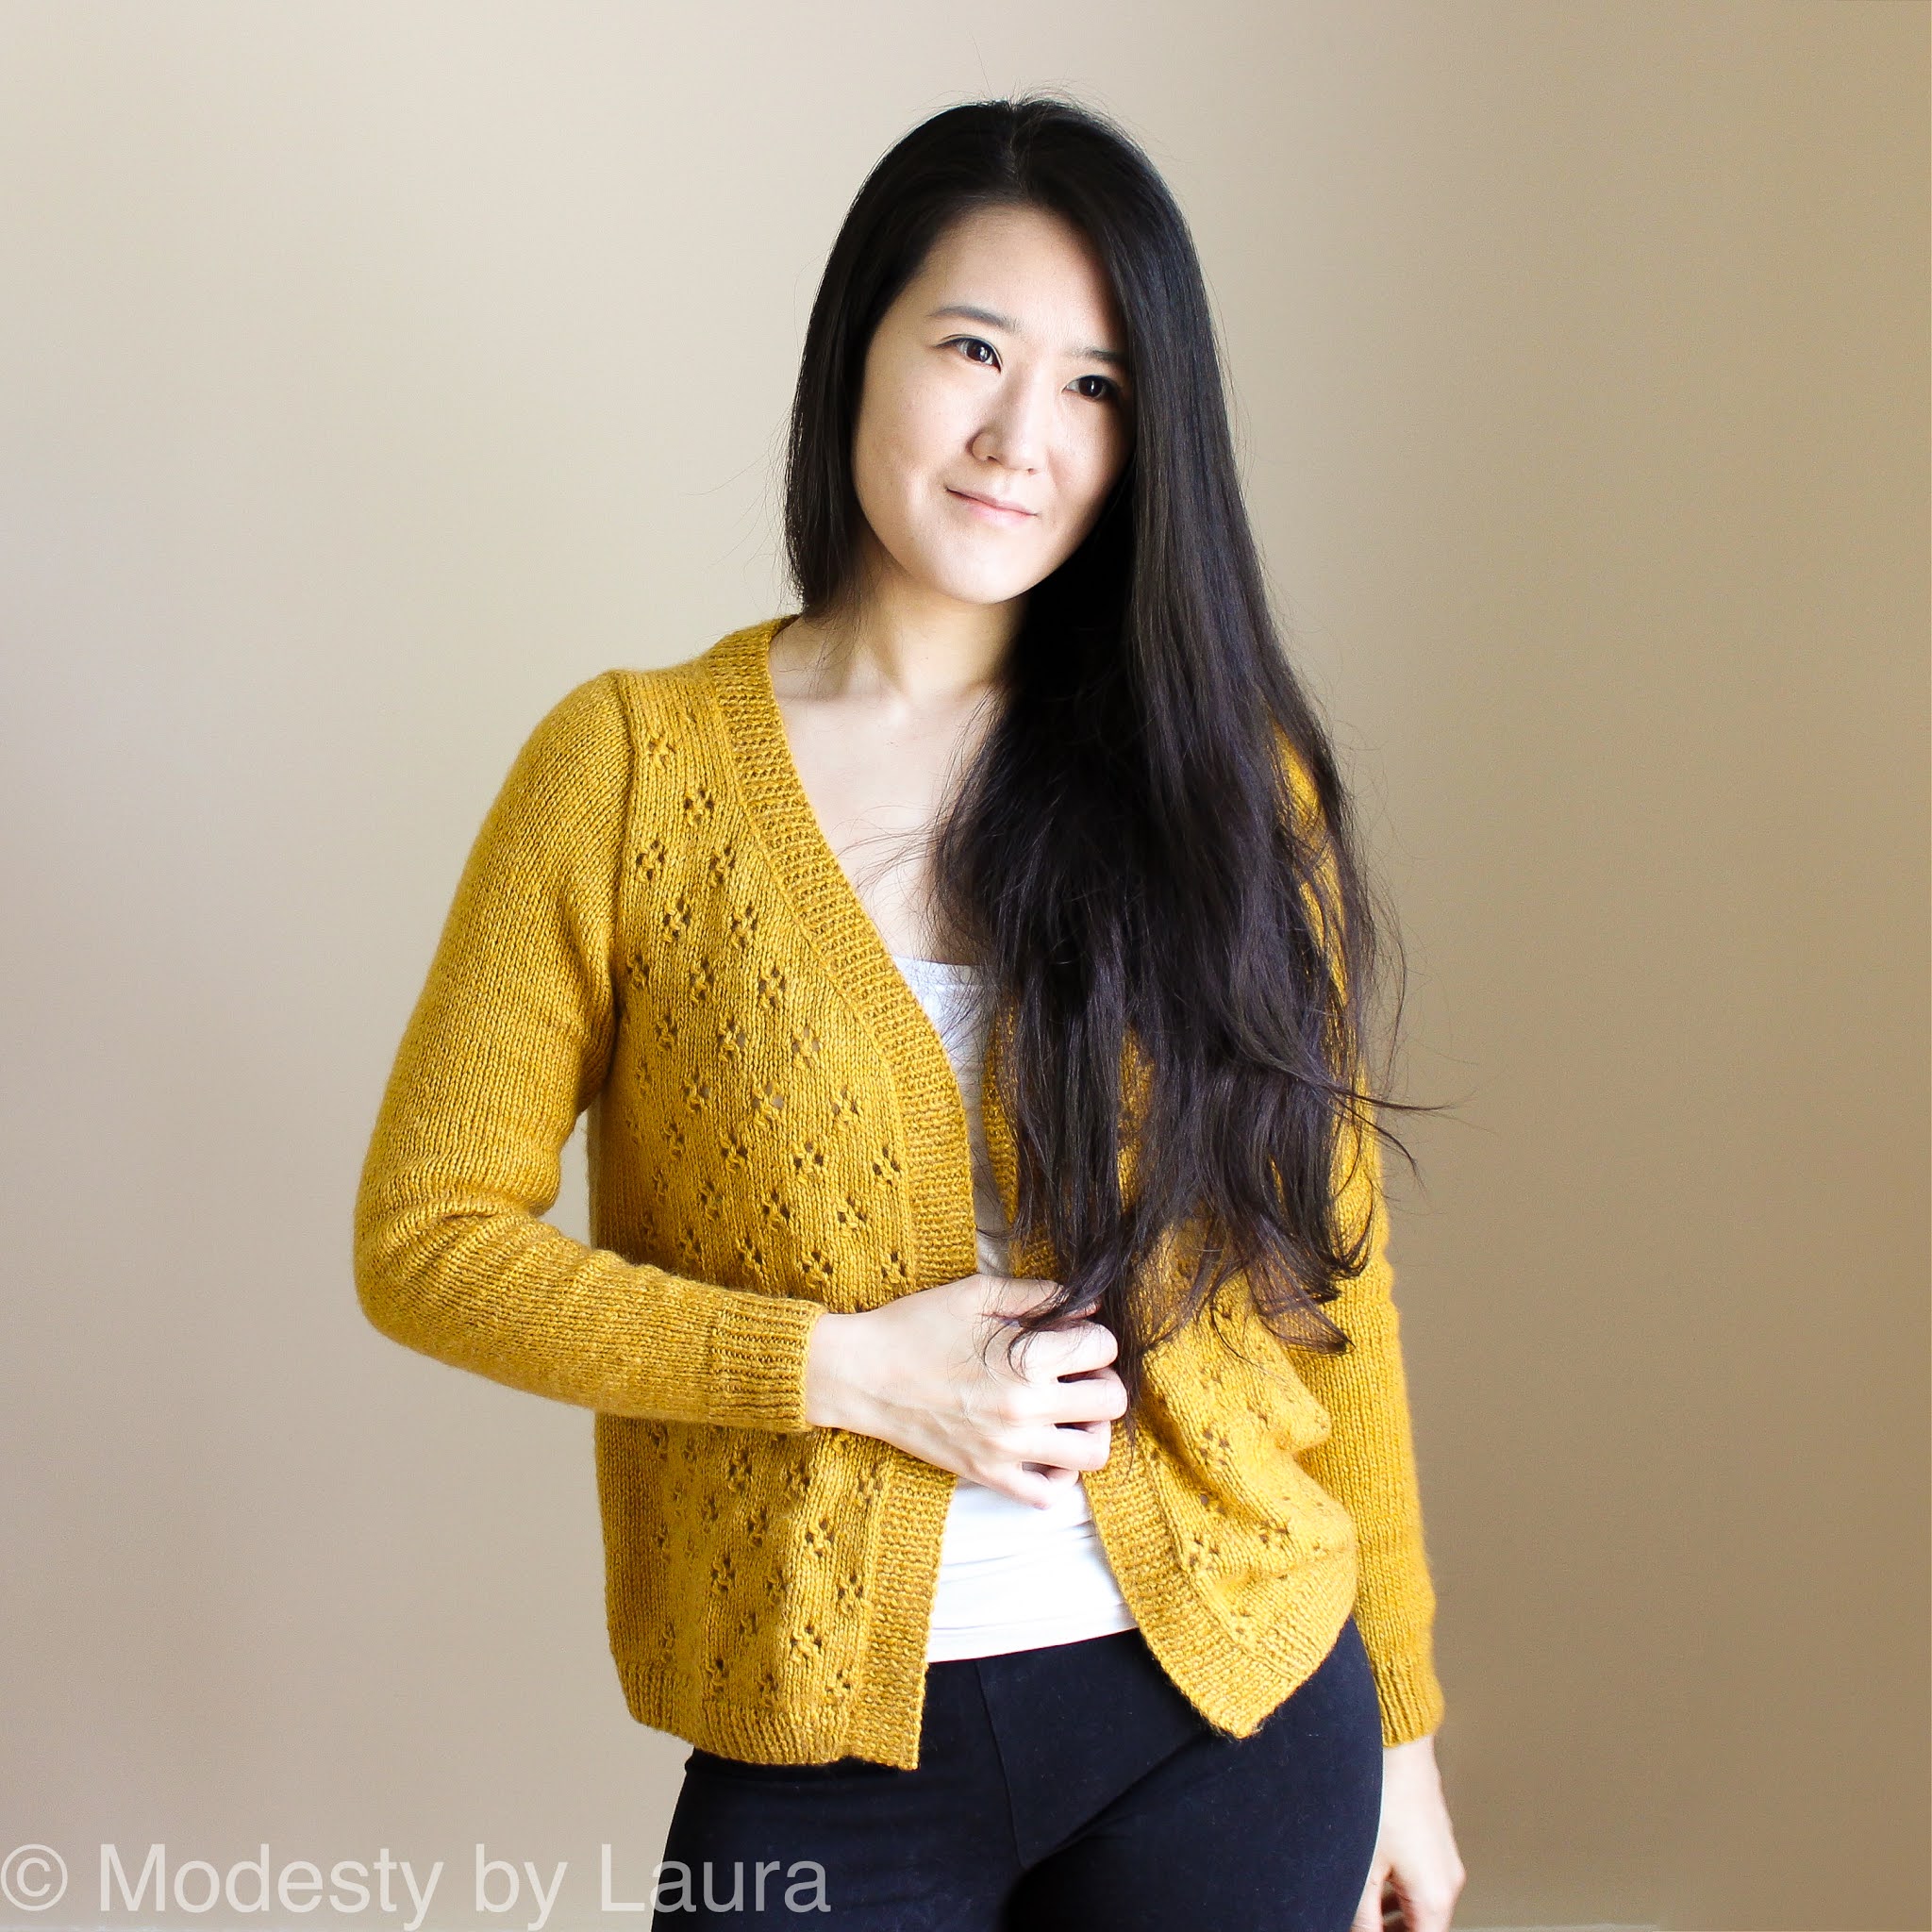 Designer of Modesty by Laura wearing a knit Cheese in the Trap Cardi